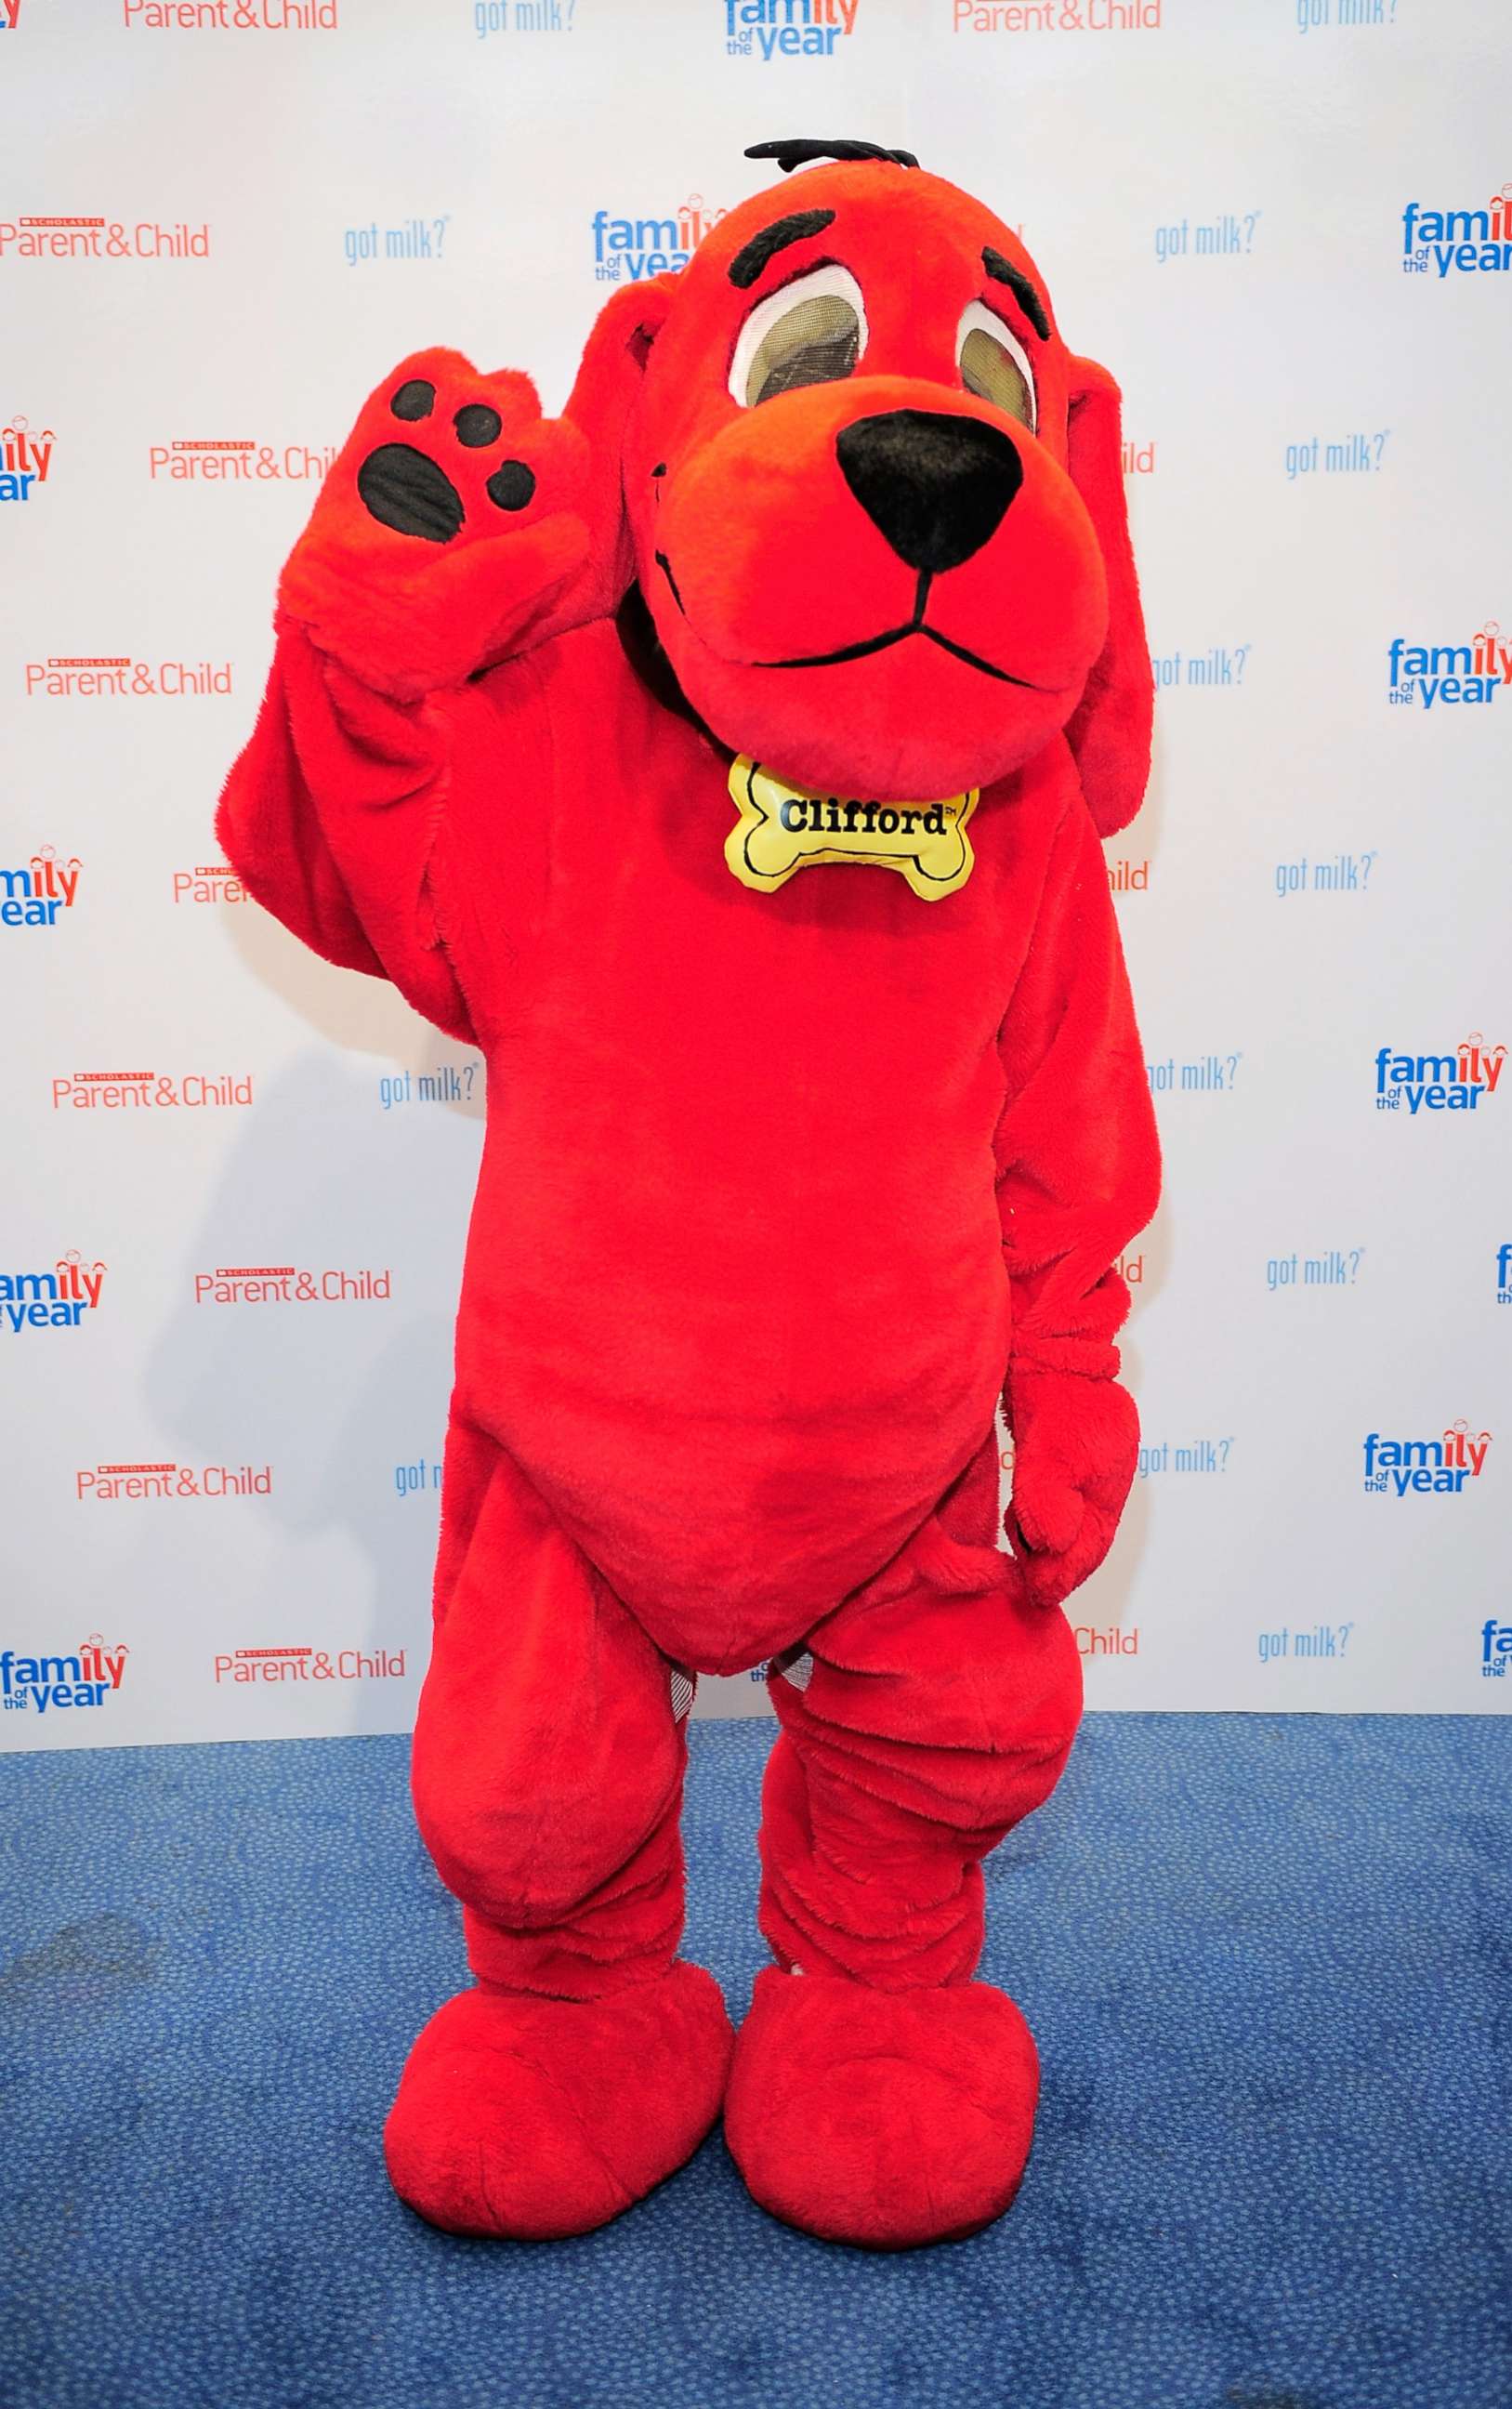 PHOTO: Cartoon personality Clifford the Big Red Dog poses for photos before at the Scholastic Parent & Child's "Family of the Year" event at Scholastic Flagship Store, May 25, 2010, in New York.